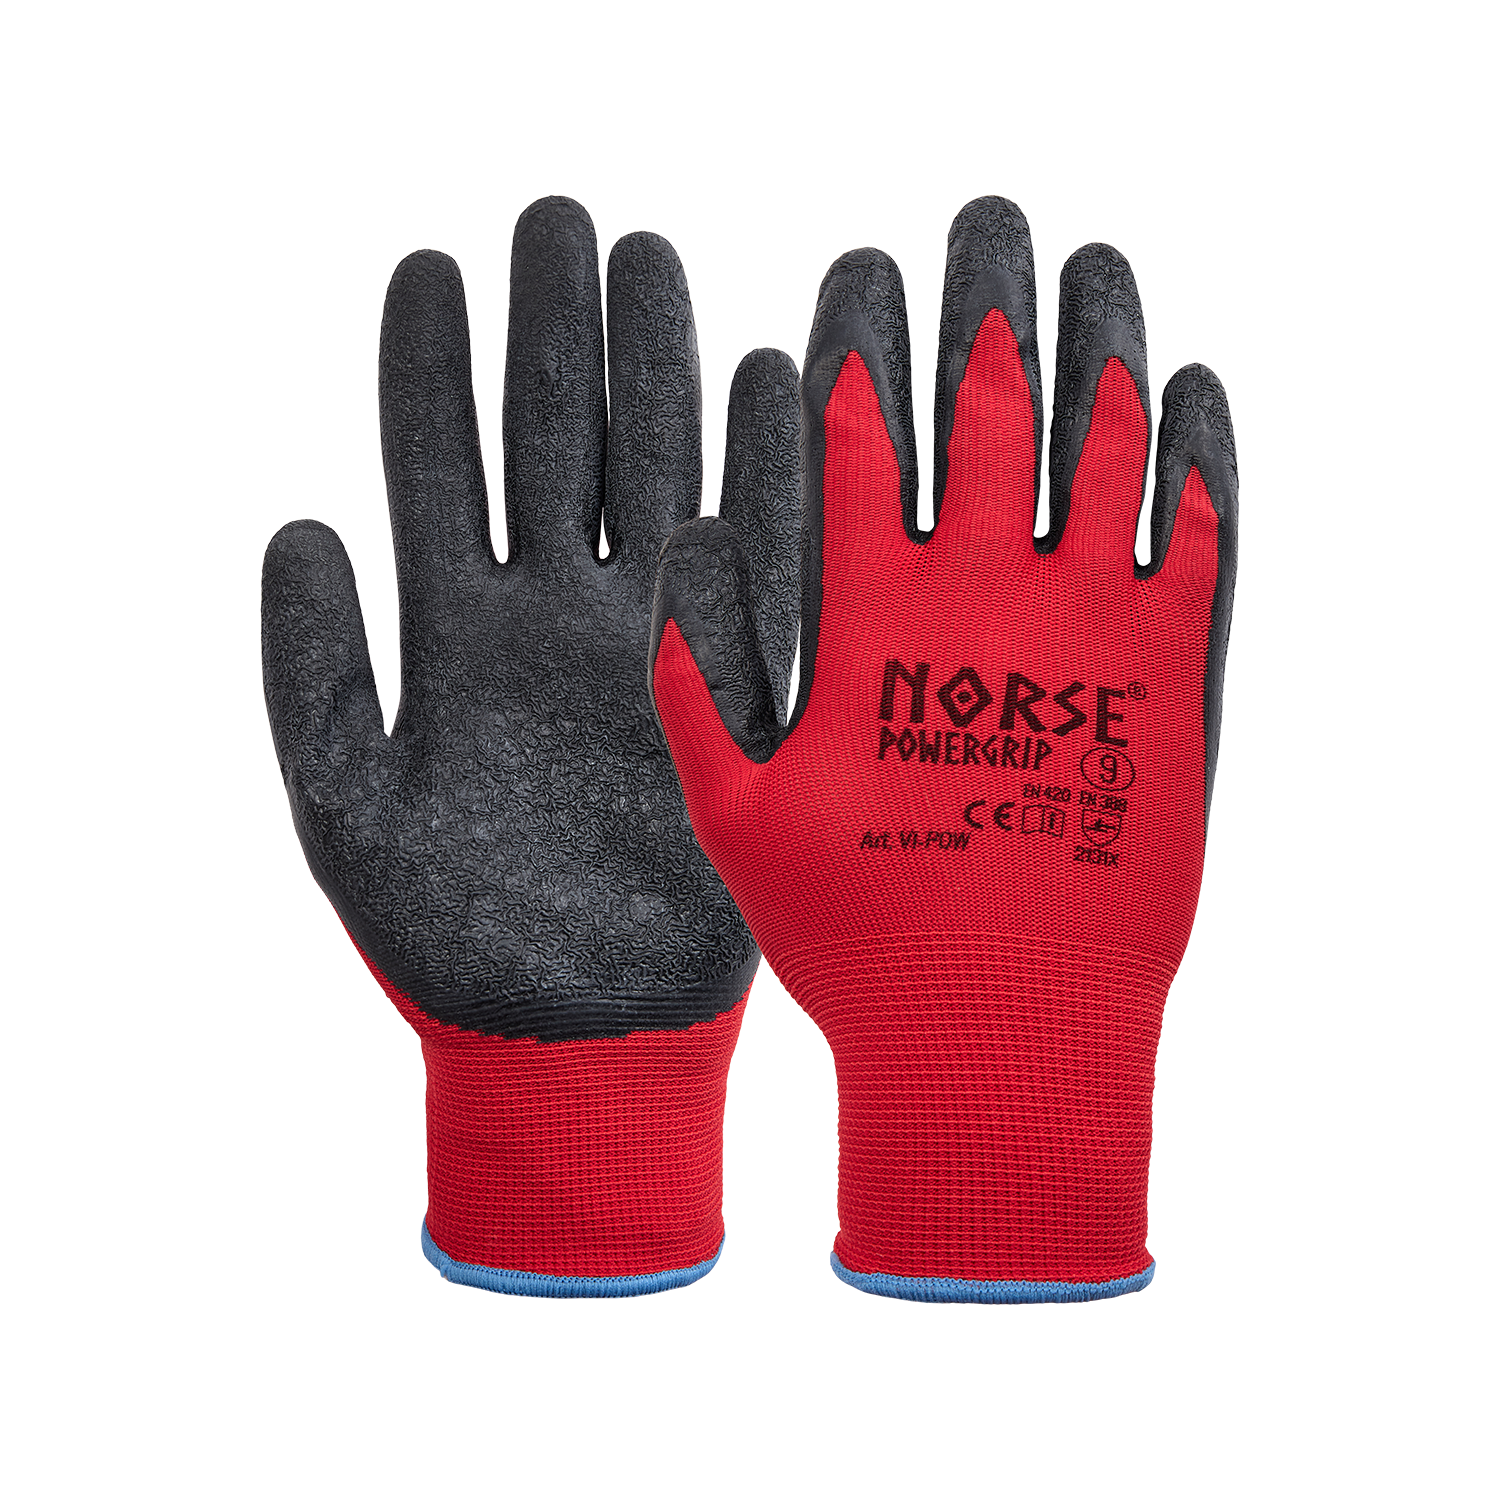 NORSE PowerGrip assembly gloves size 11